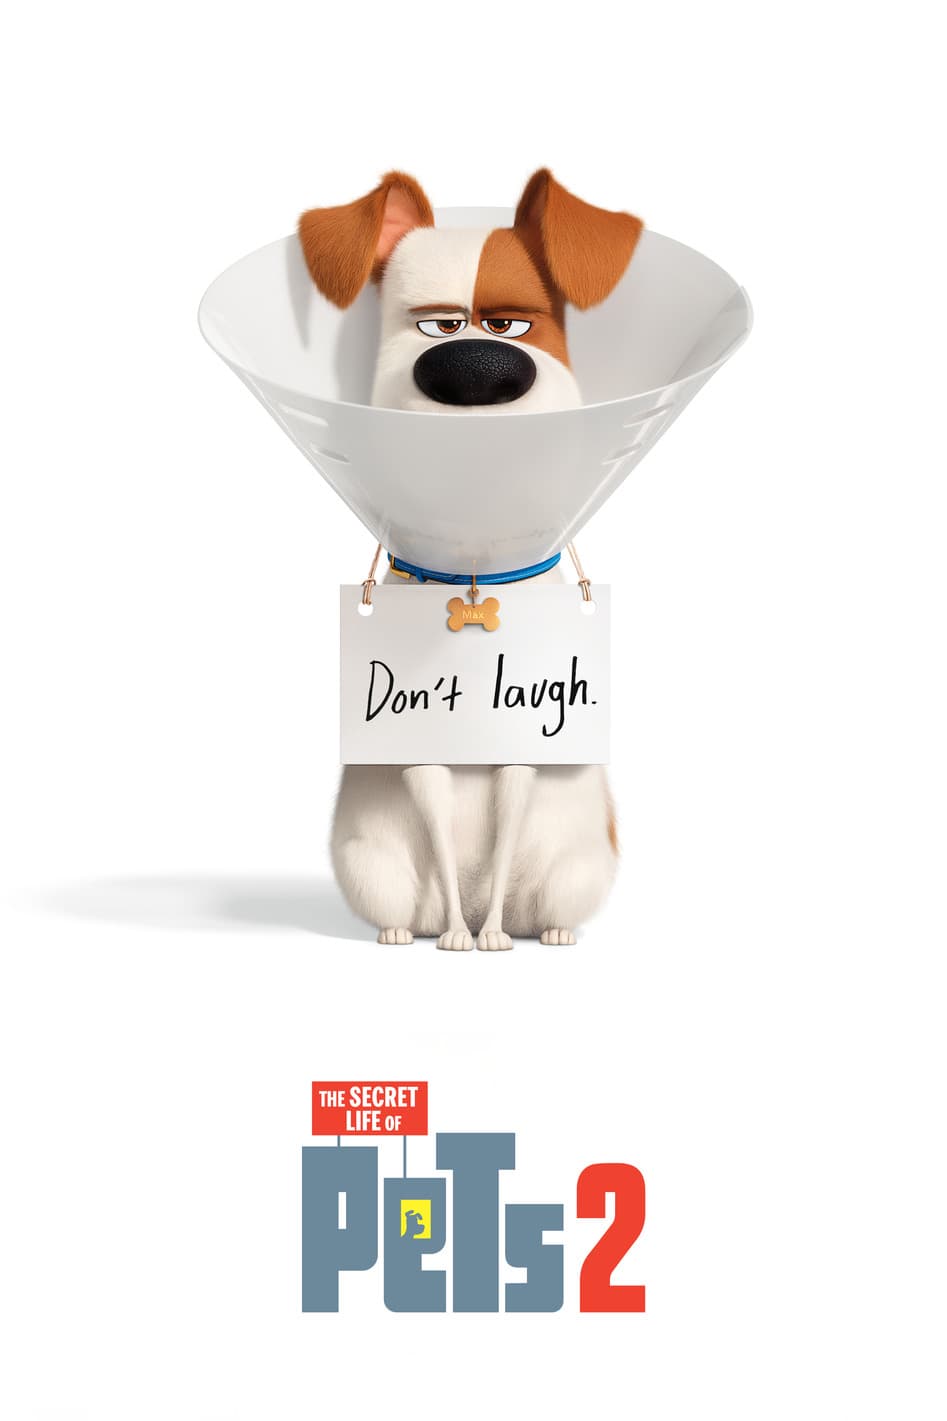 Poster for the movie "The Secret Life of Pets 2"